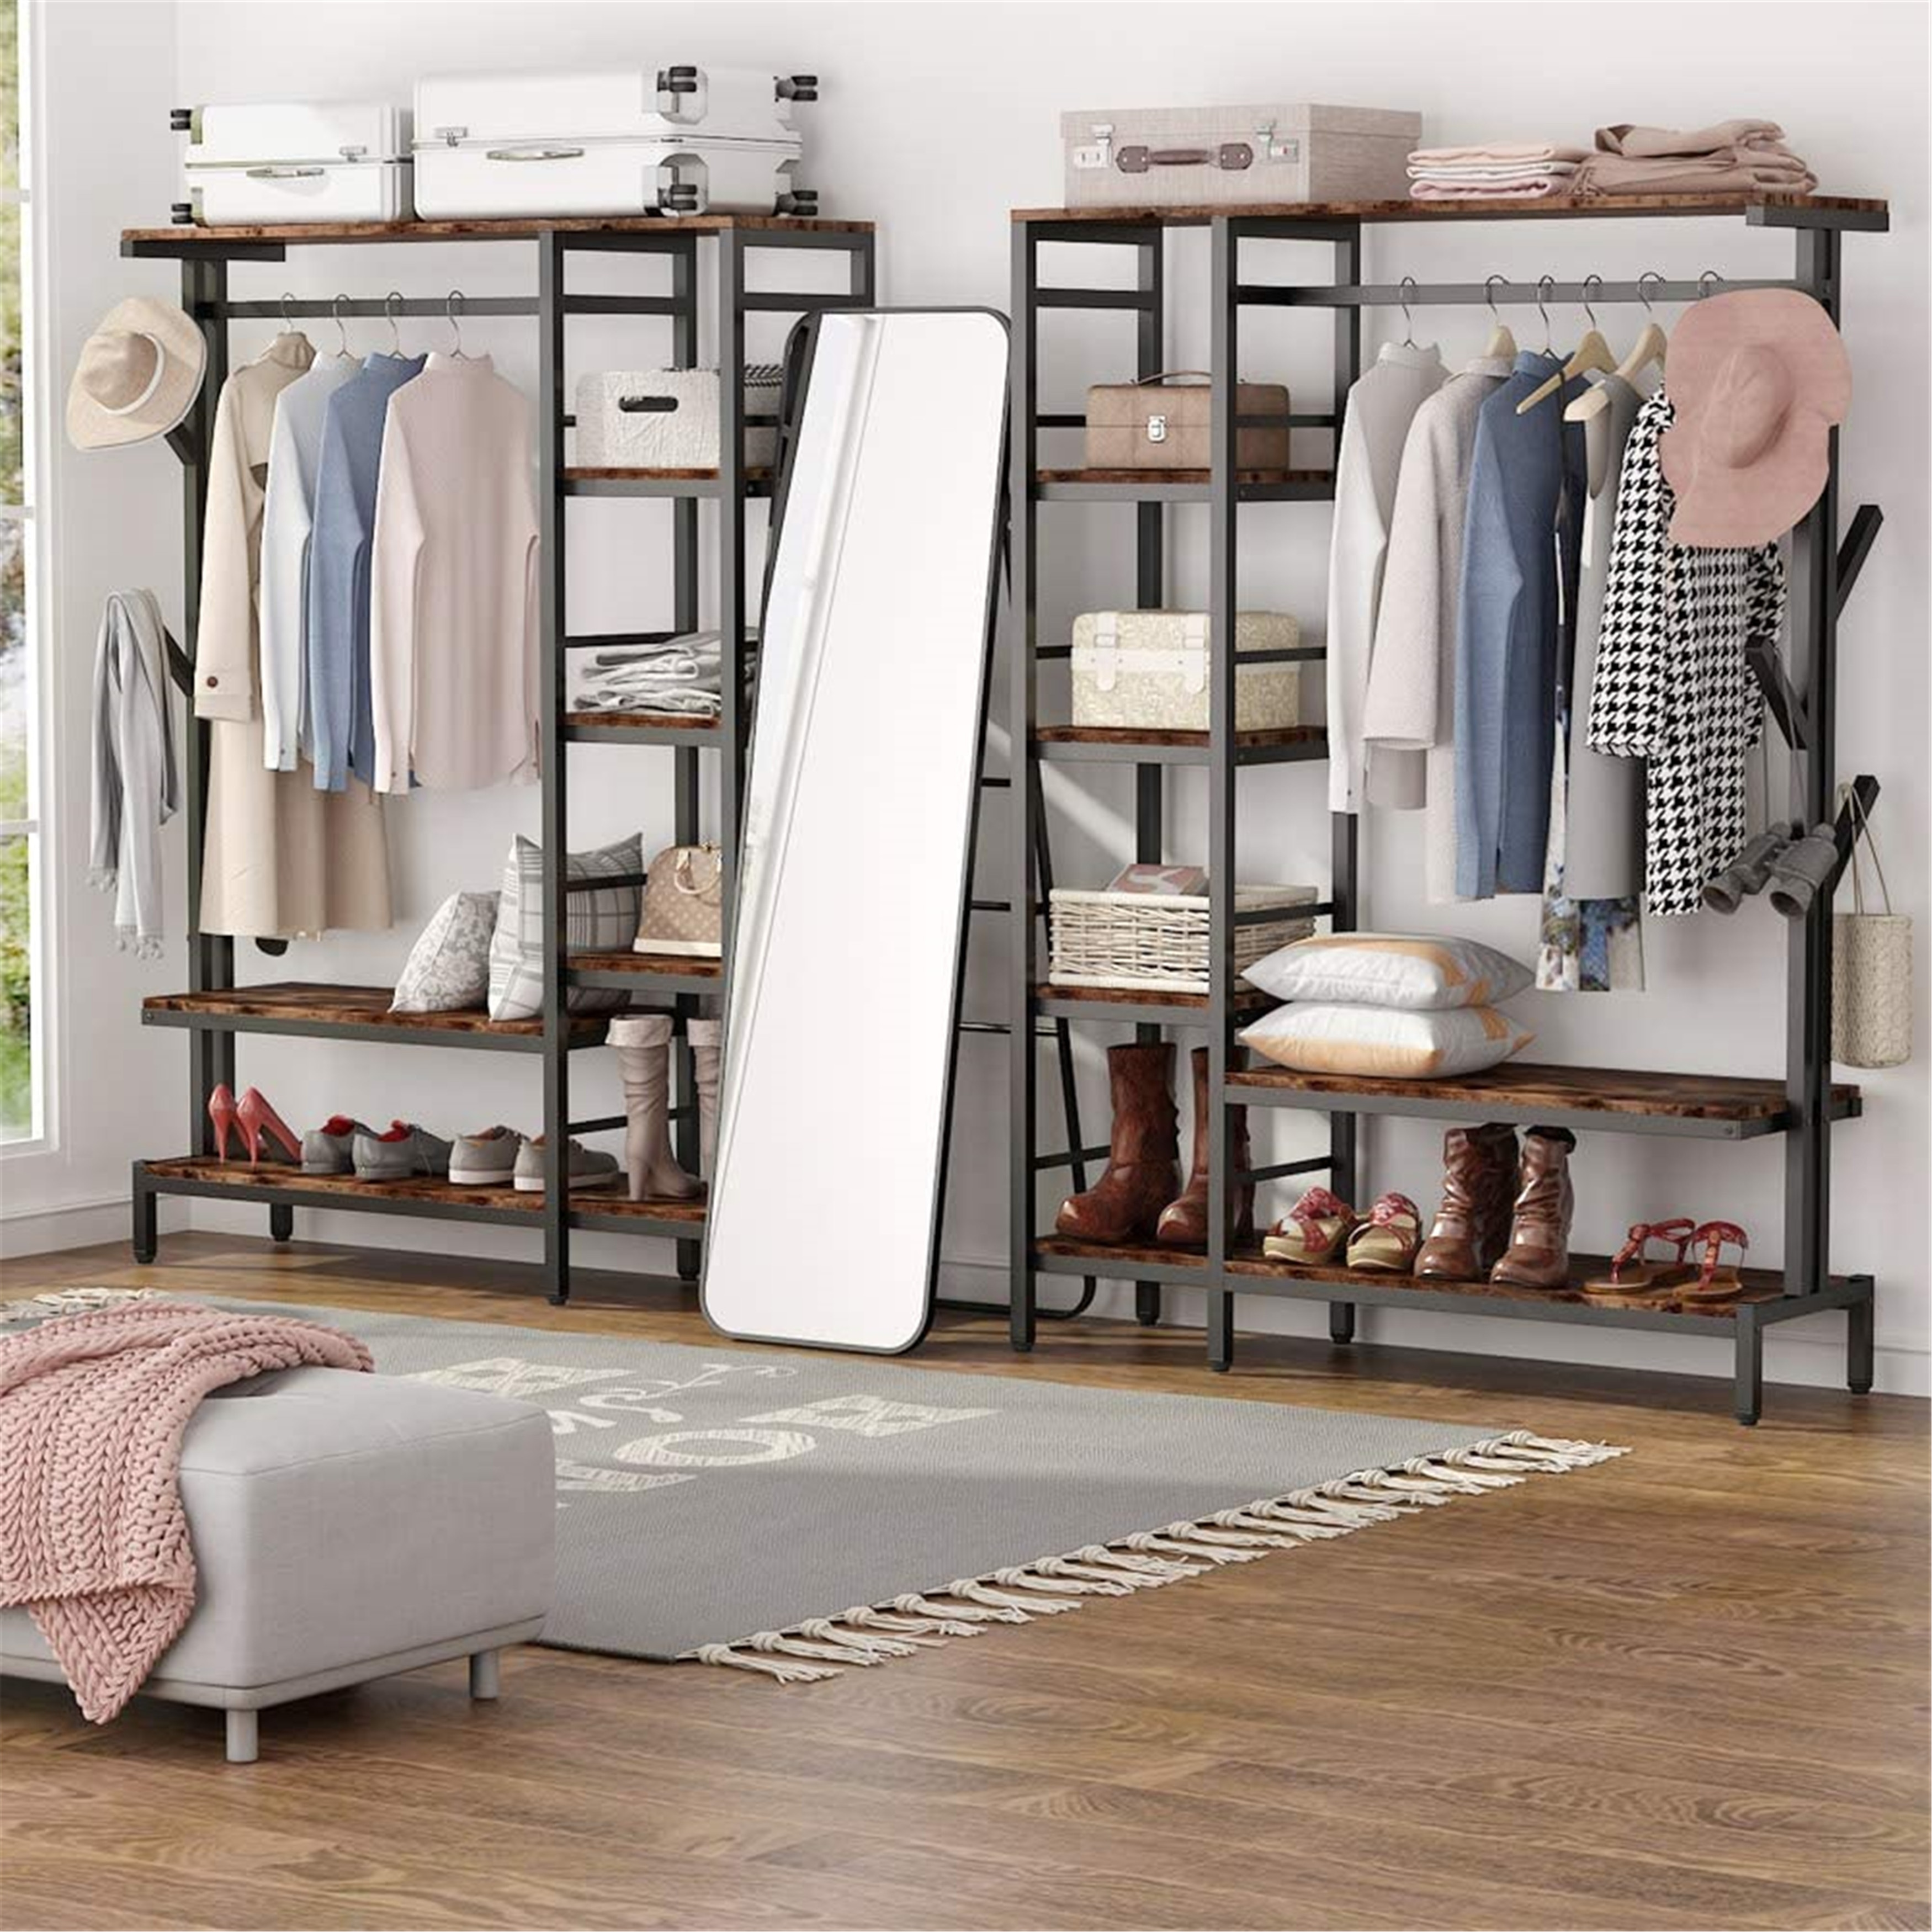 https://ak1.ostkcdn.com/images/products/is/images/direct/c61c4bd90714e2d457444f6104a31210e9f0729c/Free-Standing-Closet-Organizer-with-Hooks-Garment-Rack-with-Shelves-and-Hanging-Rod.jpg